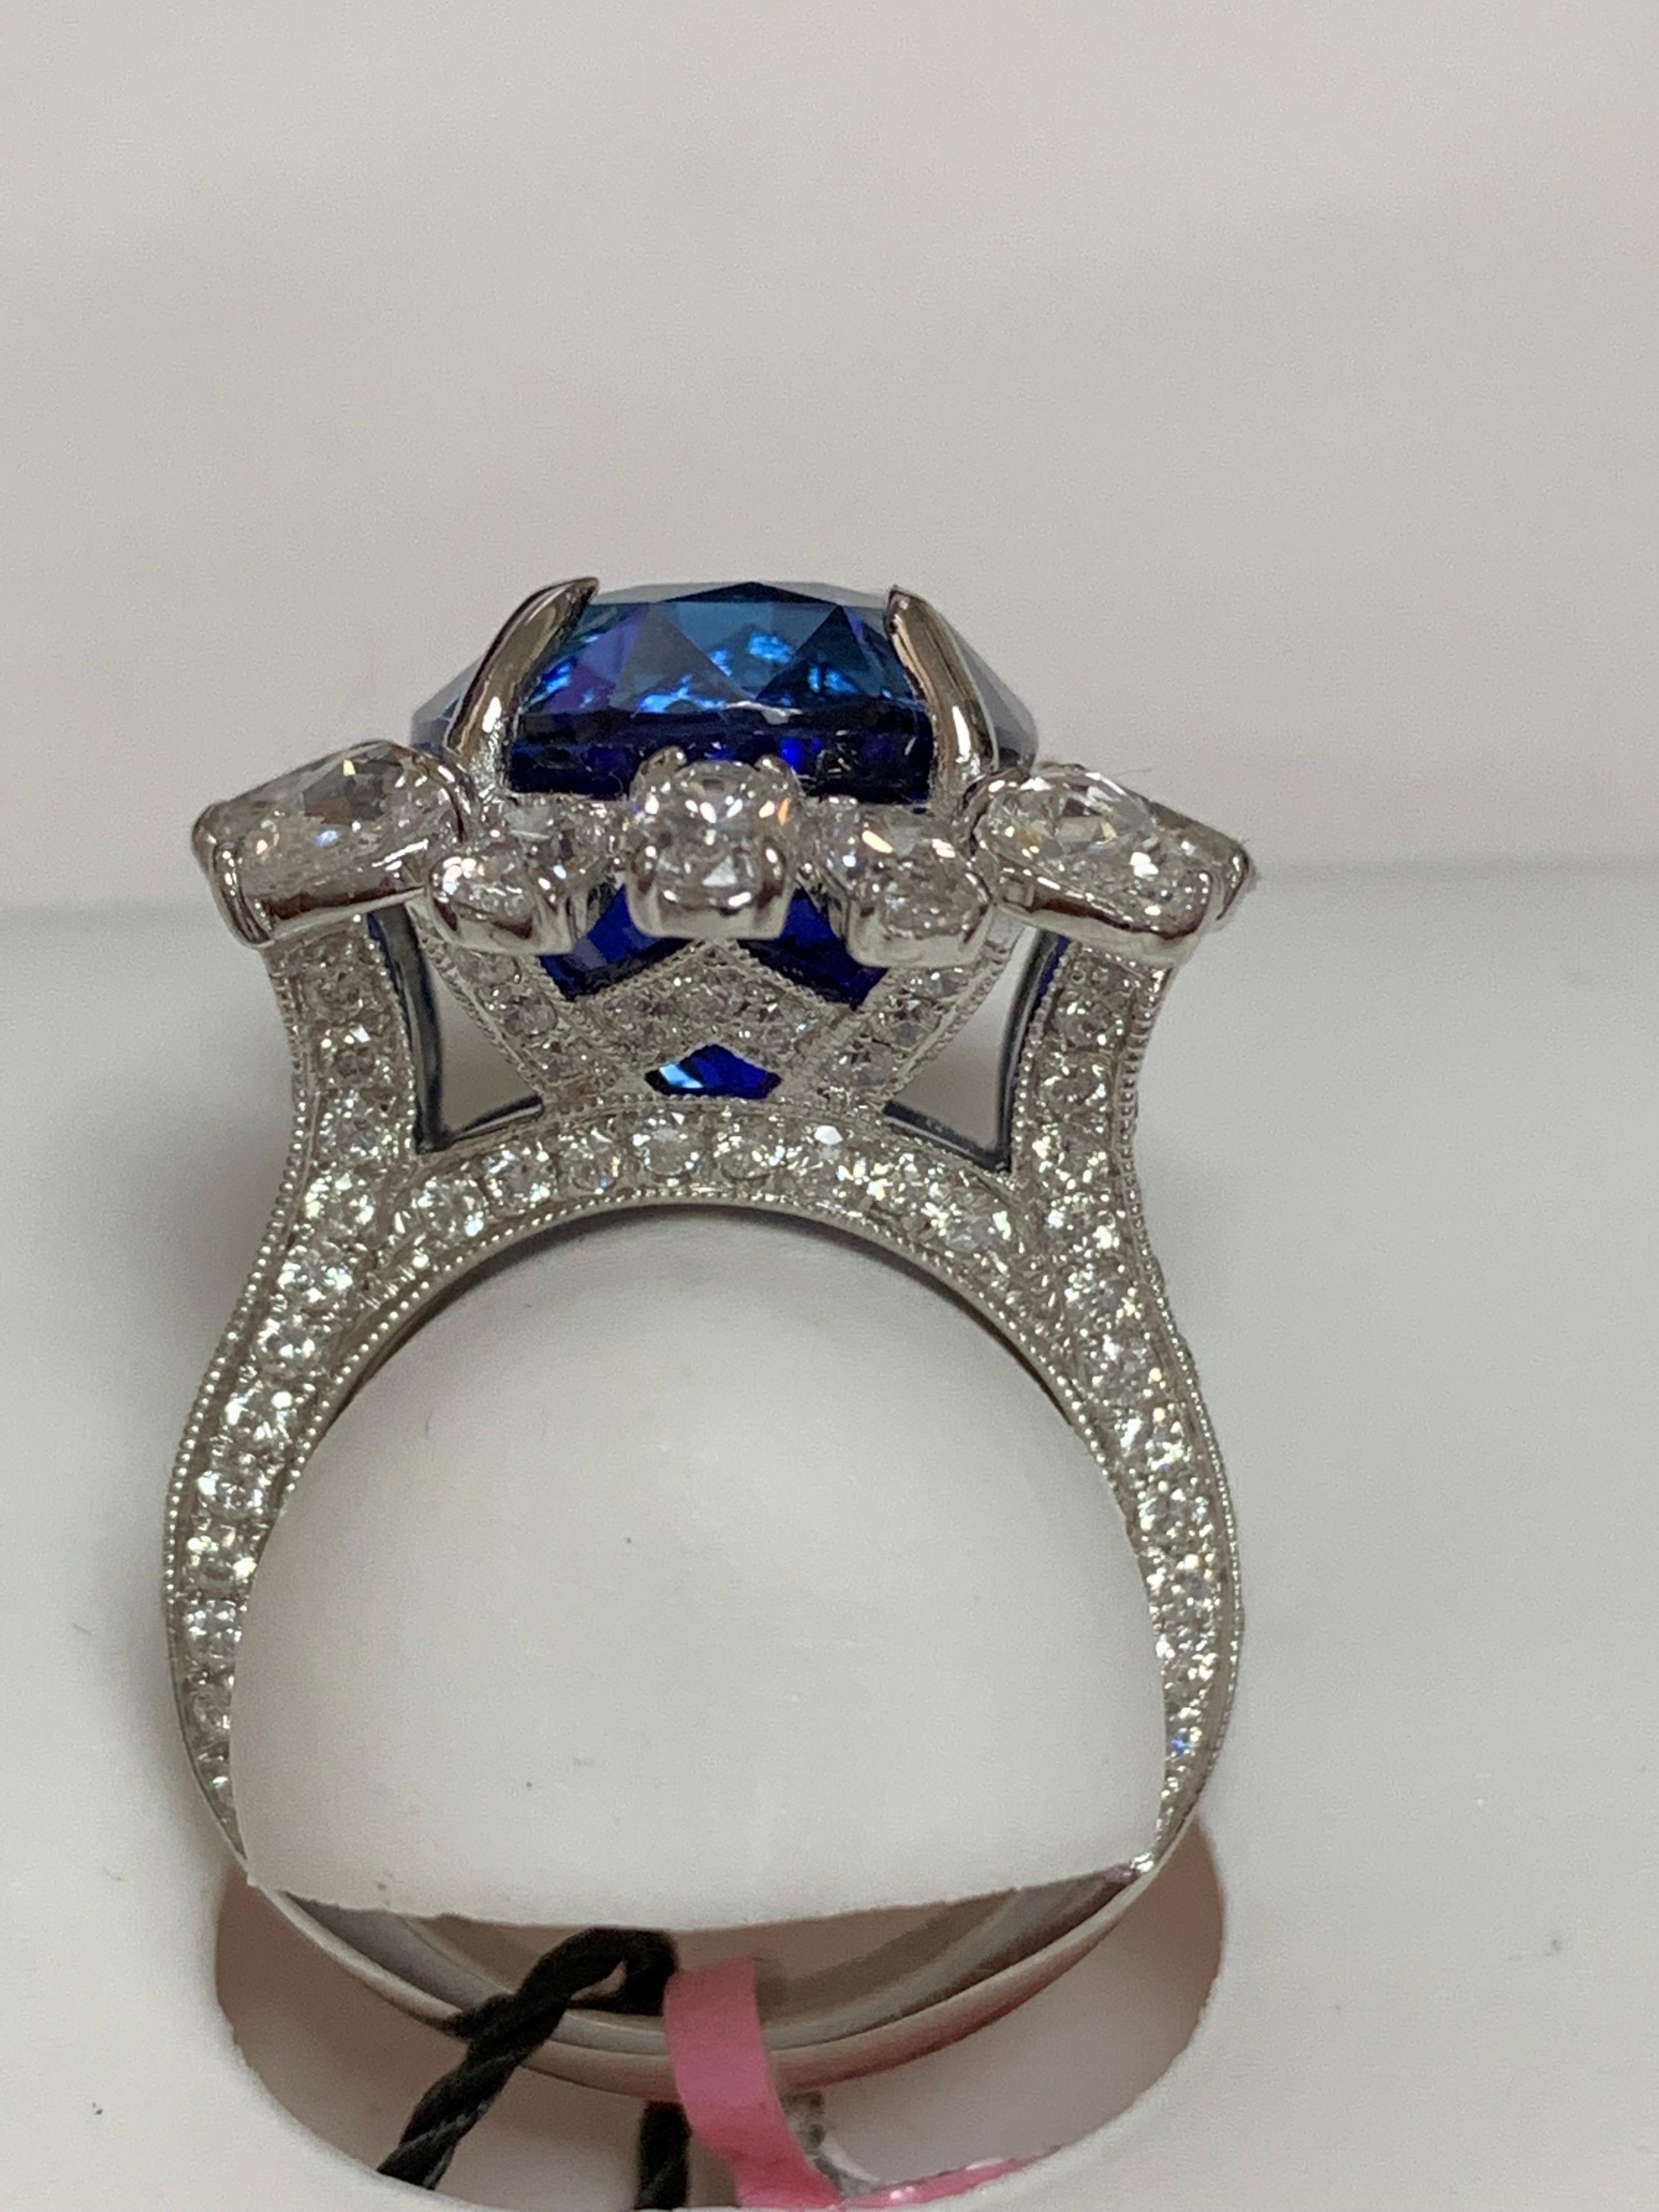 Oval Cut GIA Certified 20.08 Carat Blue Sapphire and Diamonds Ring